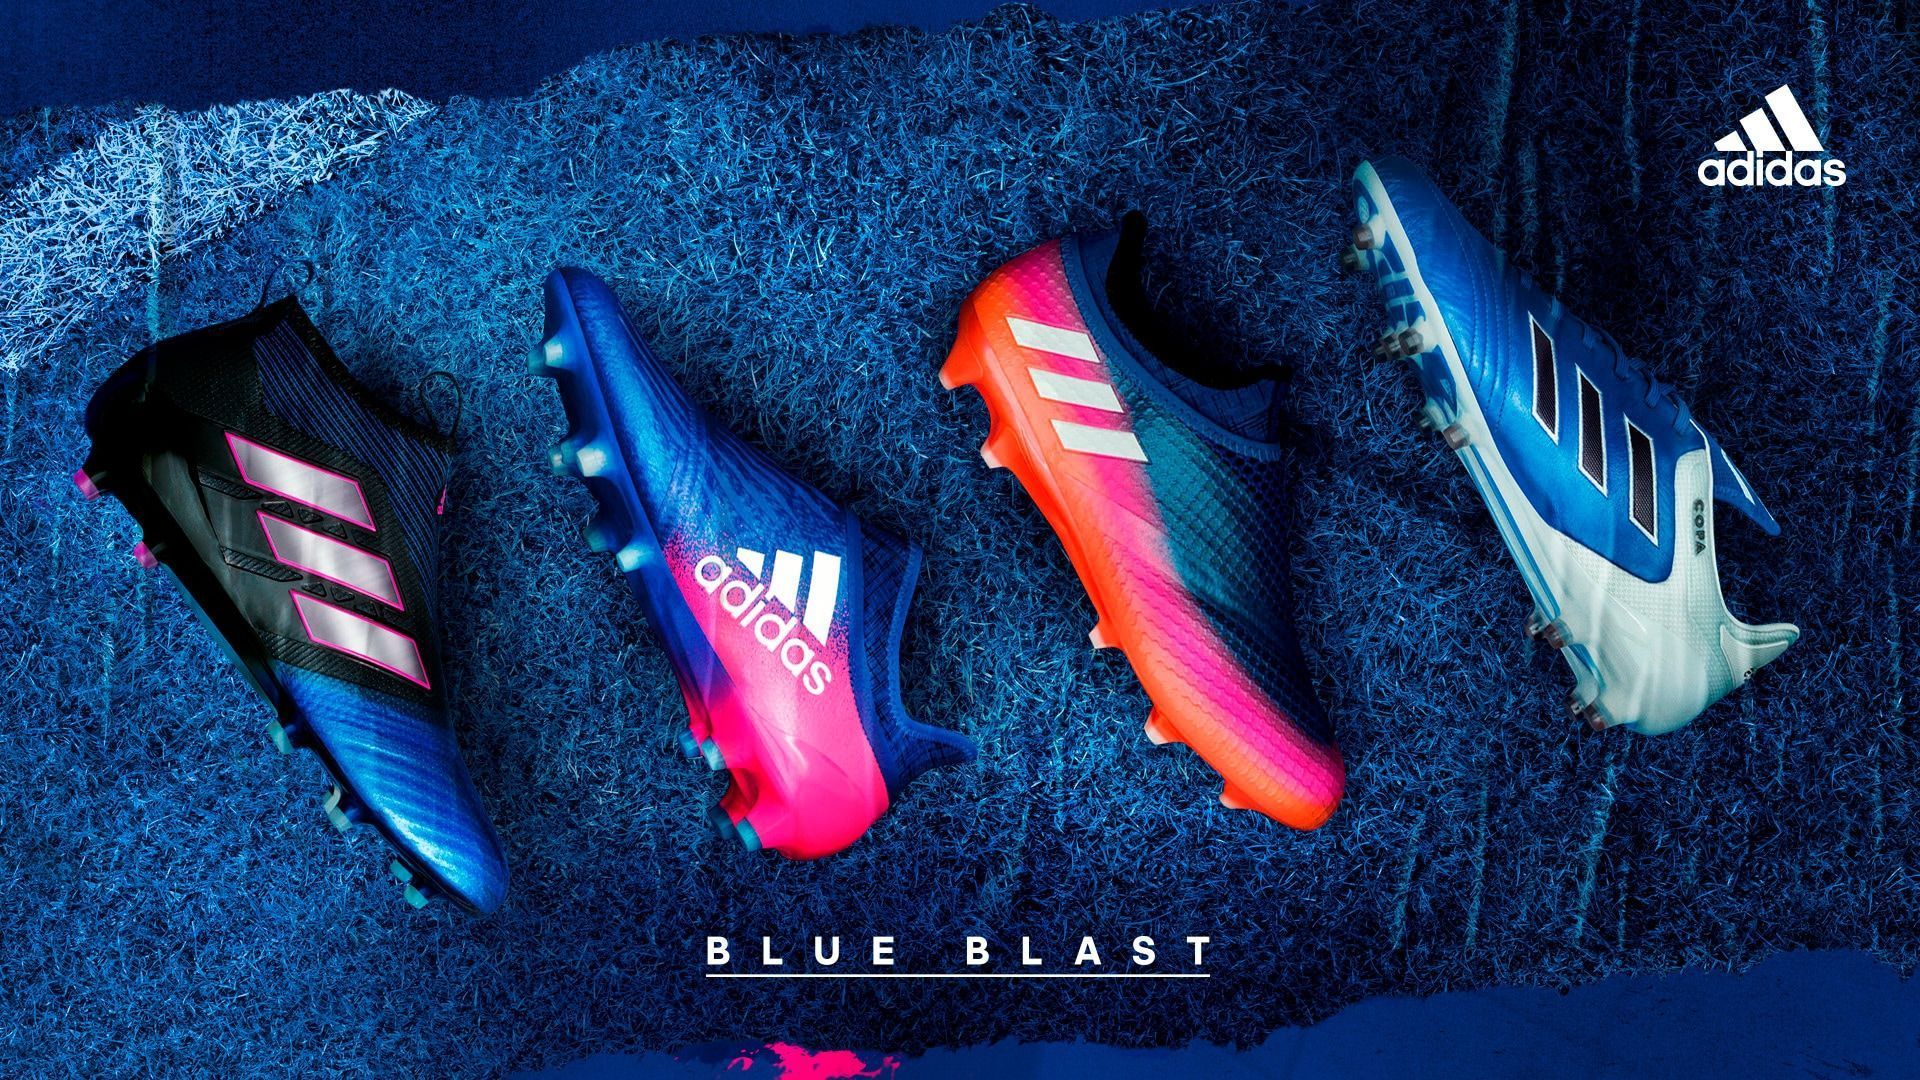 iPhone Adidas Soccer Cleats Wallpaper